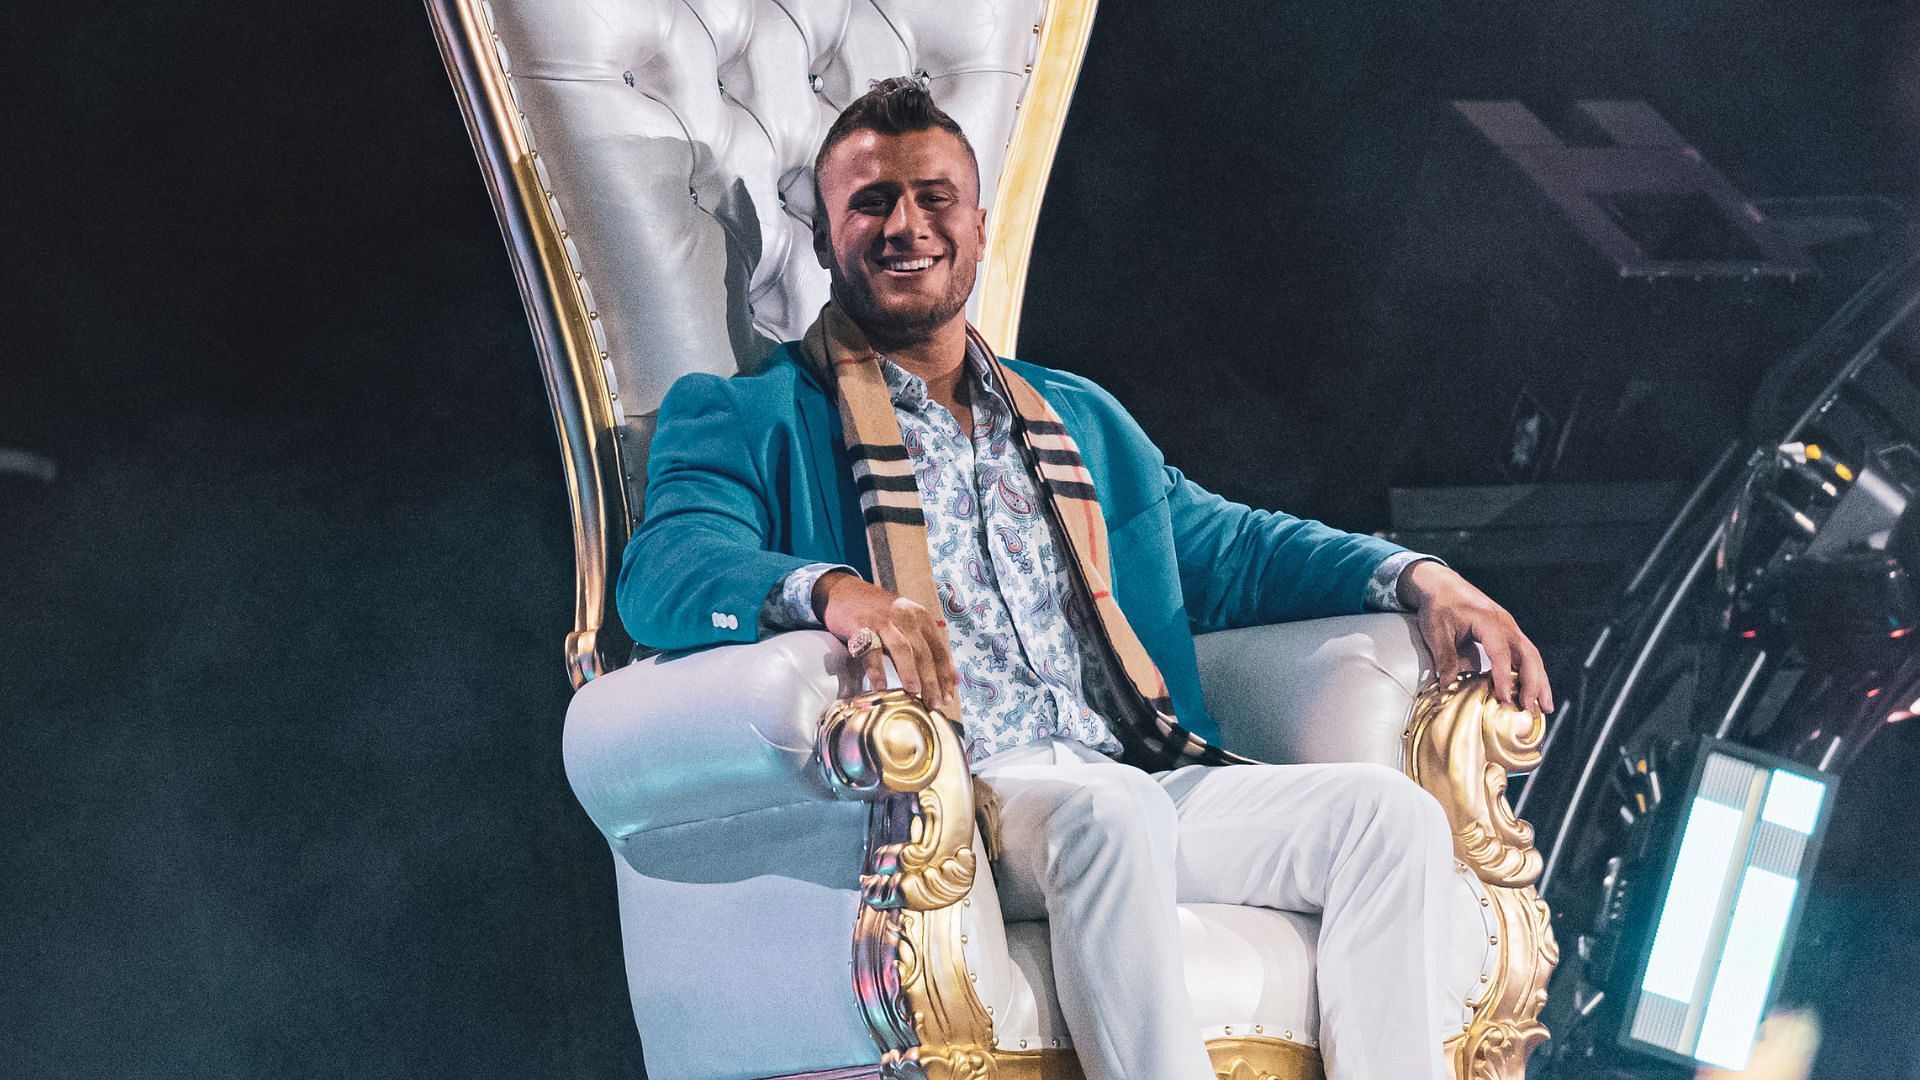 MJF is very happy with his new AEW salary (credit: Jay Lee Photography)